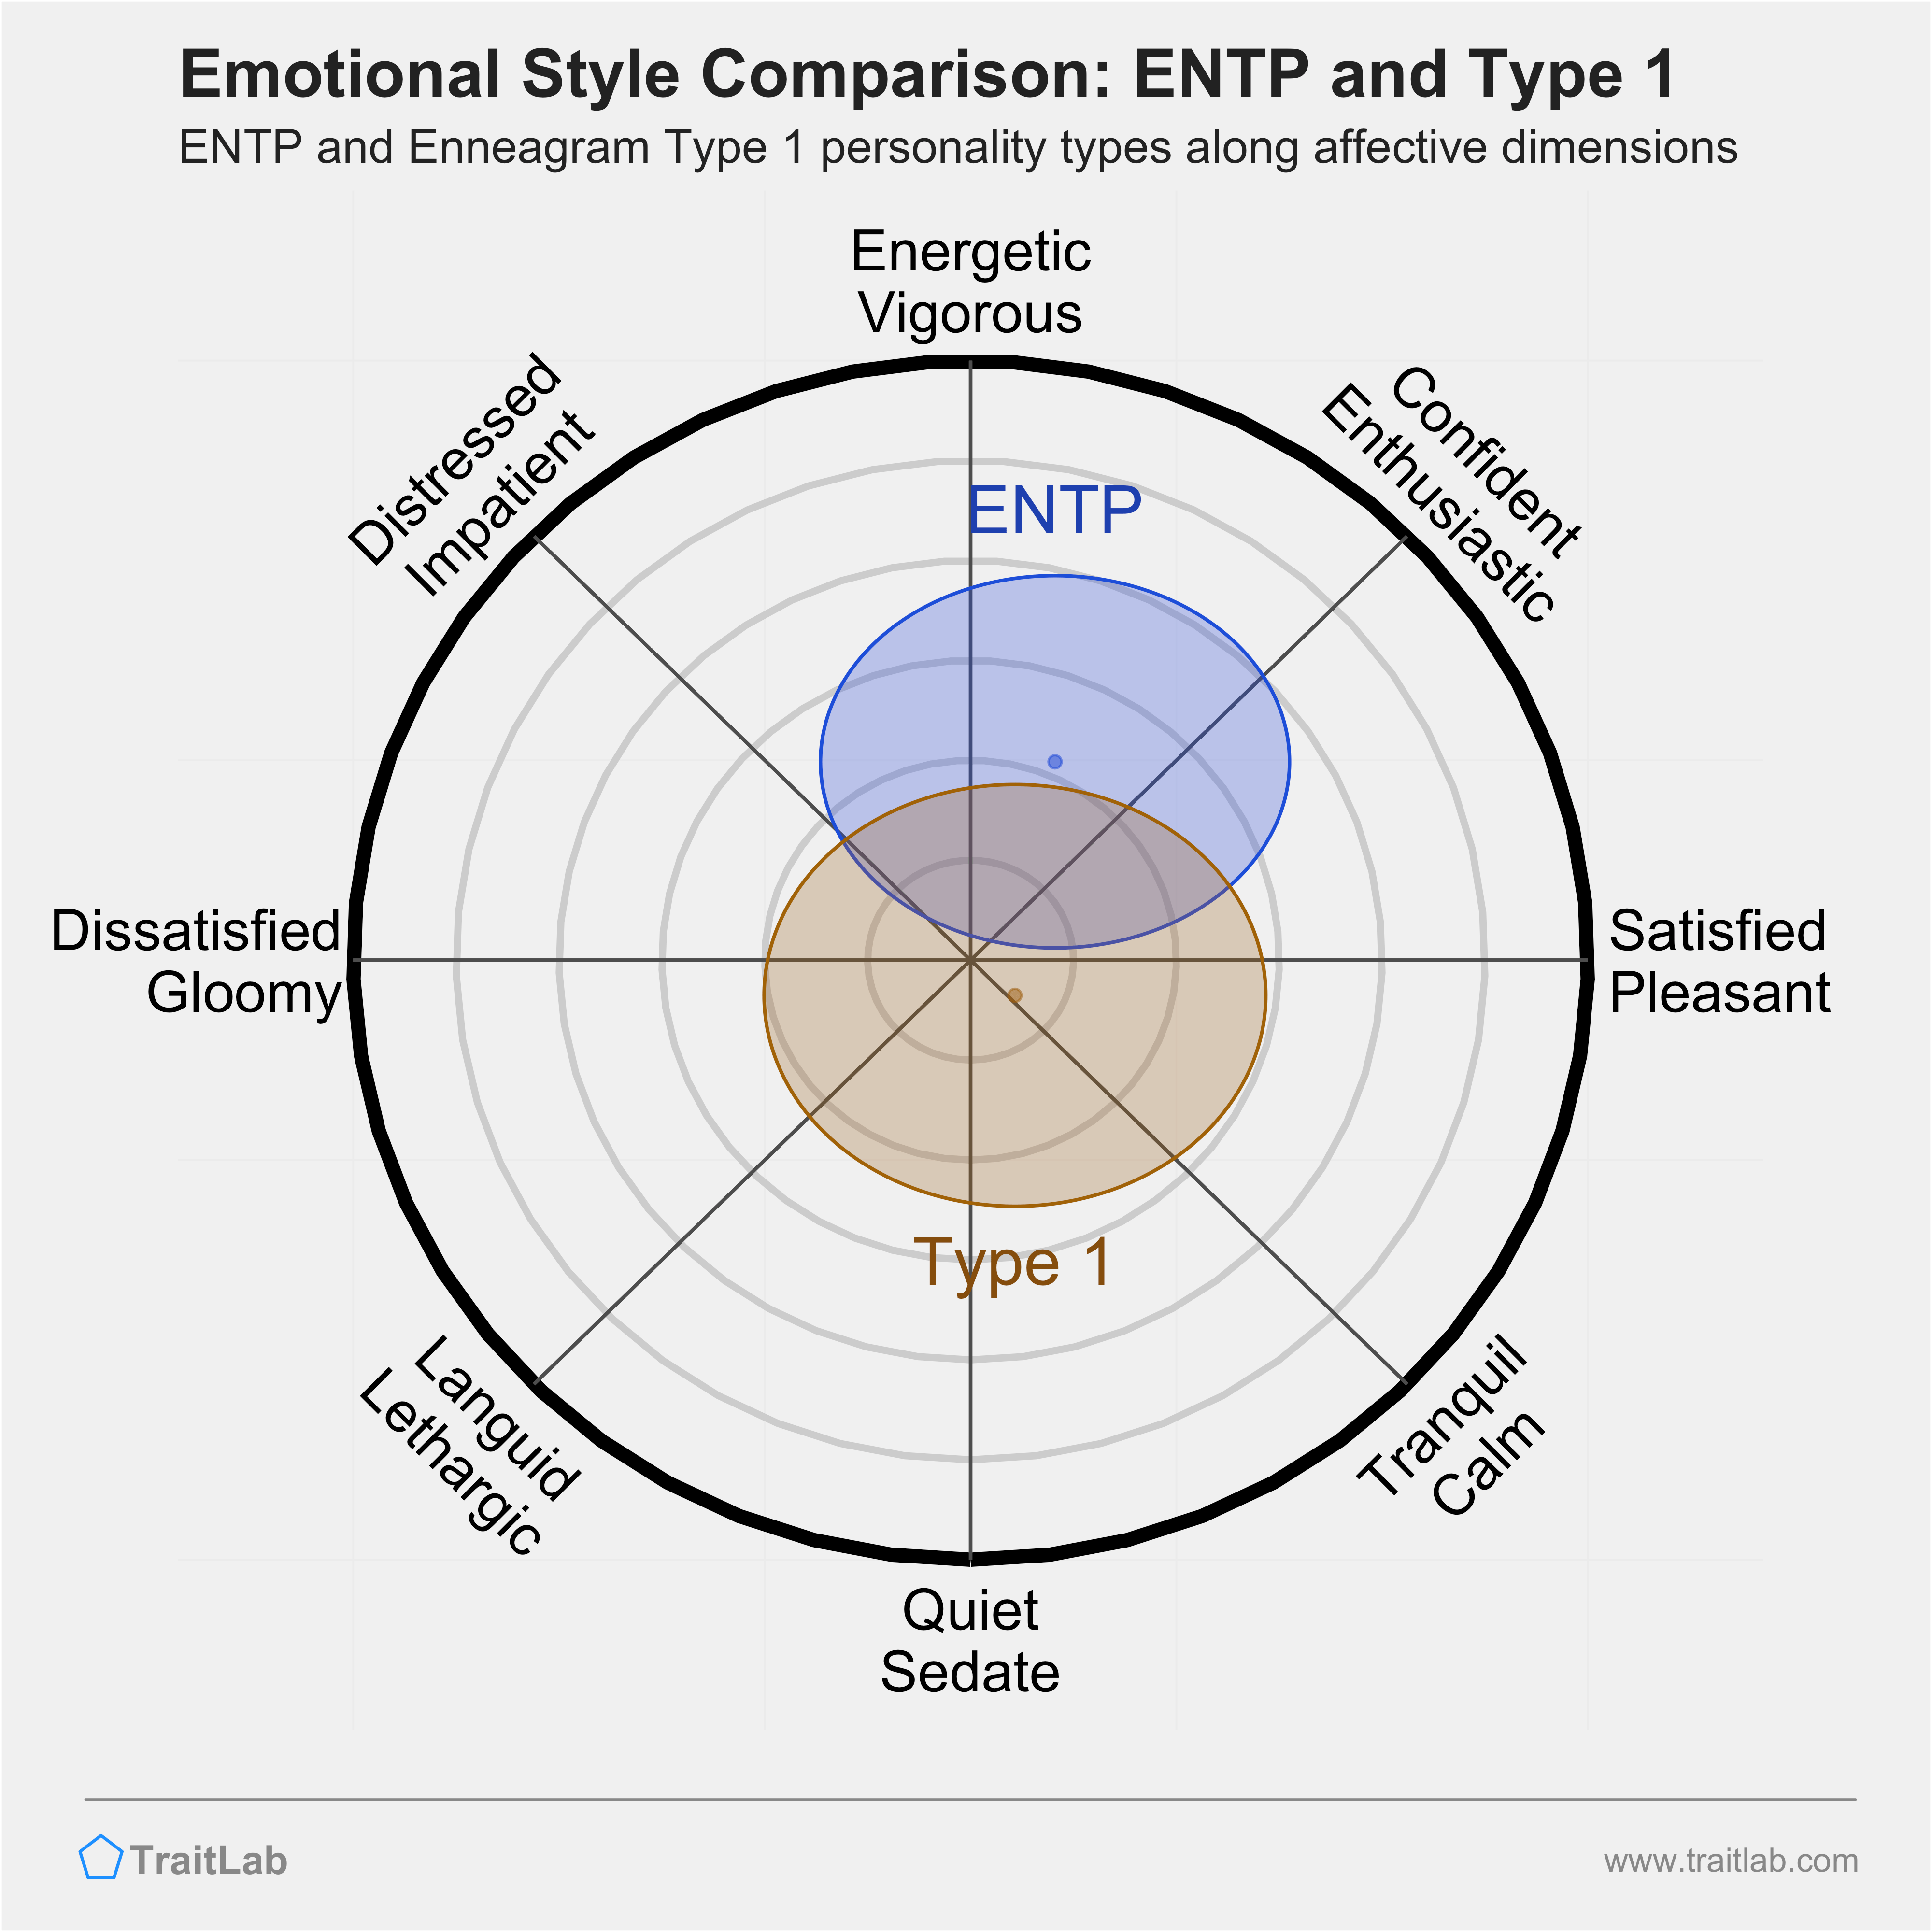 ENTP and Type 1 comparison across emotional (affective) dimensions